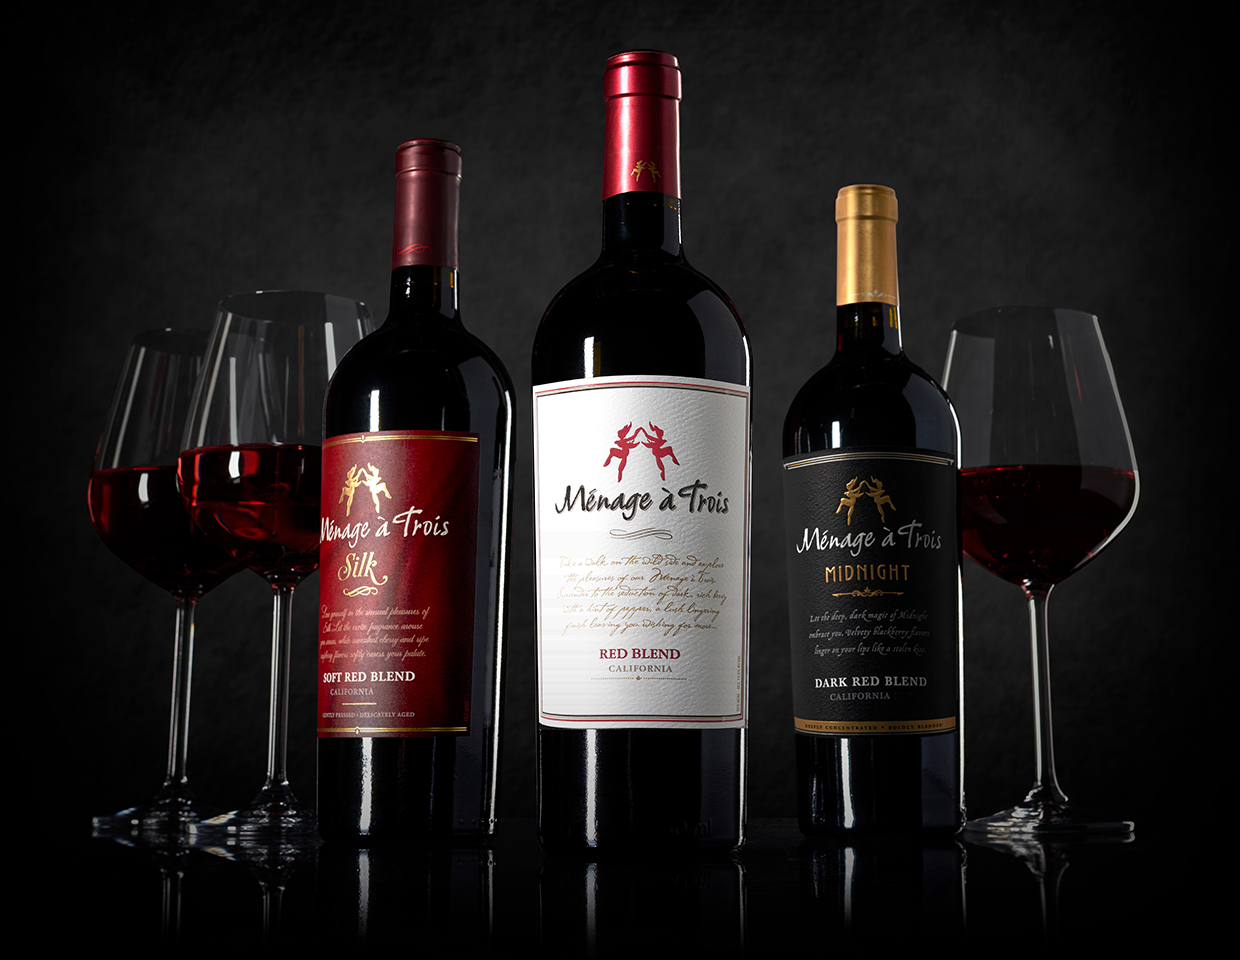 bottle lineup of three menage a trois red wines, silk soft red blend, california red blend, and midnight dark red blend.